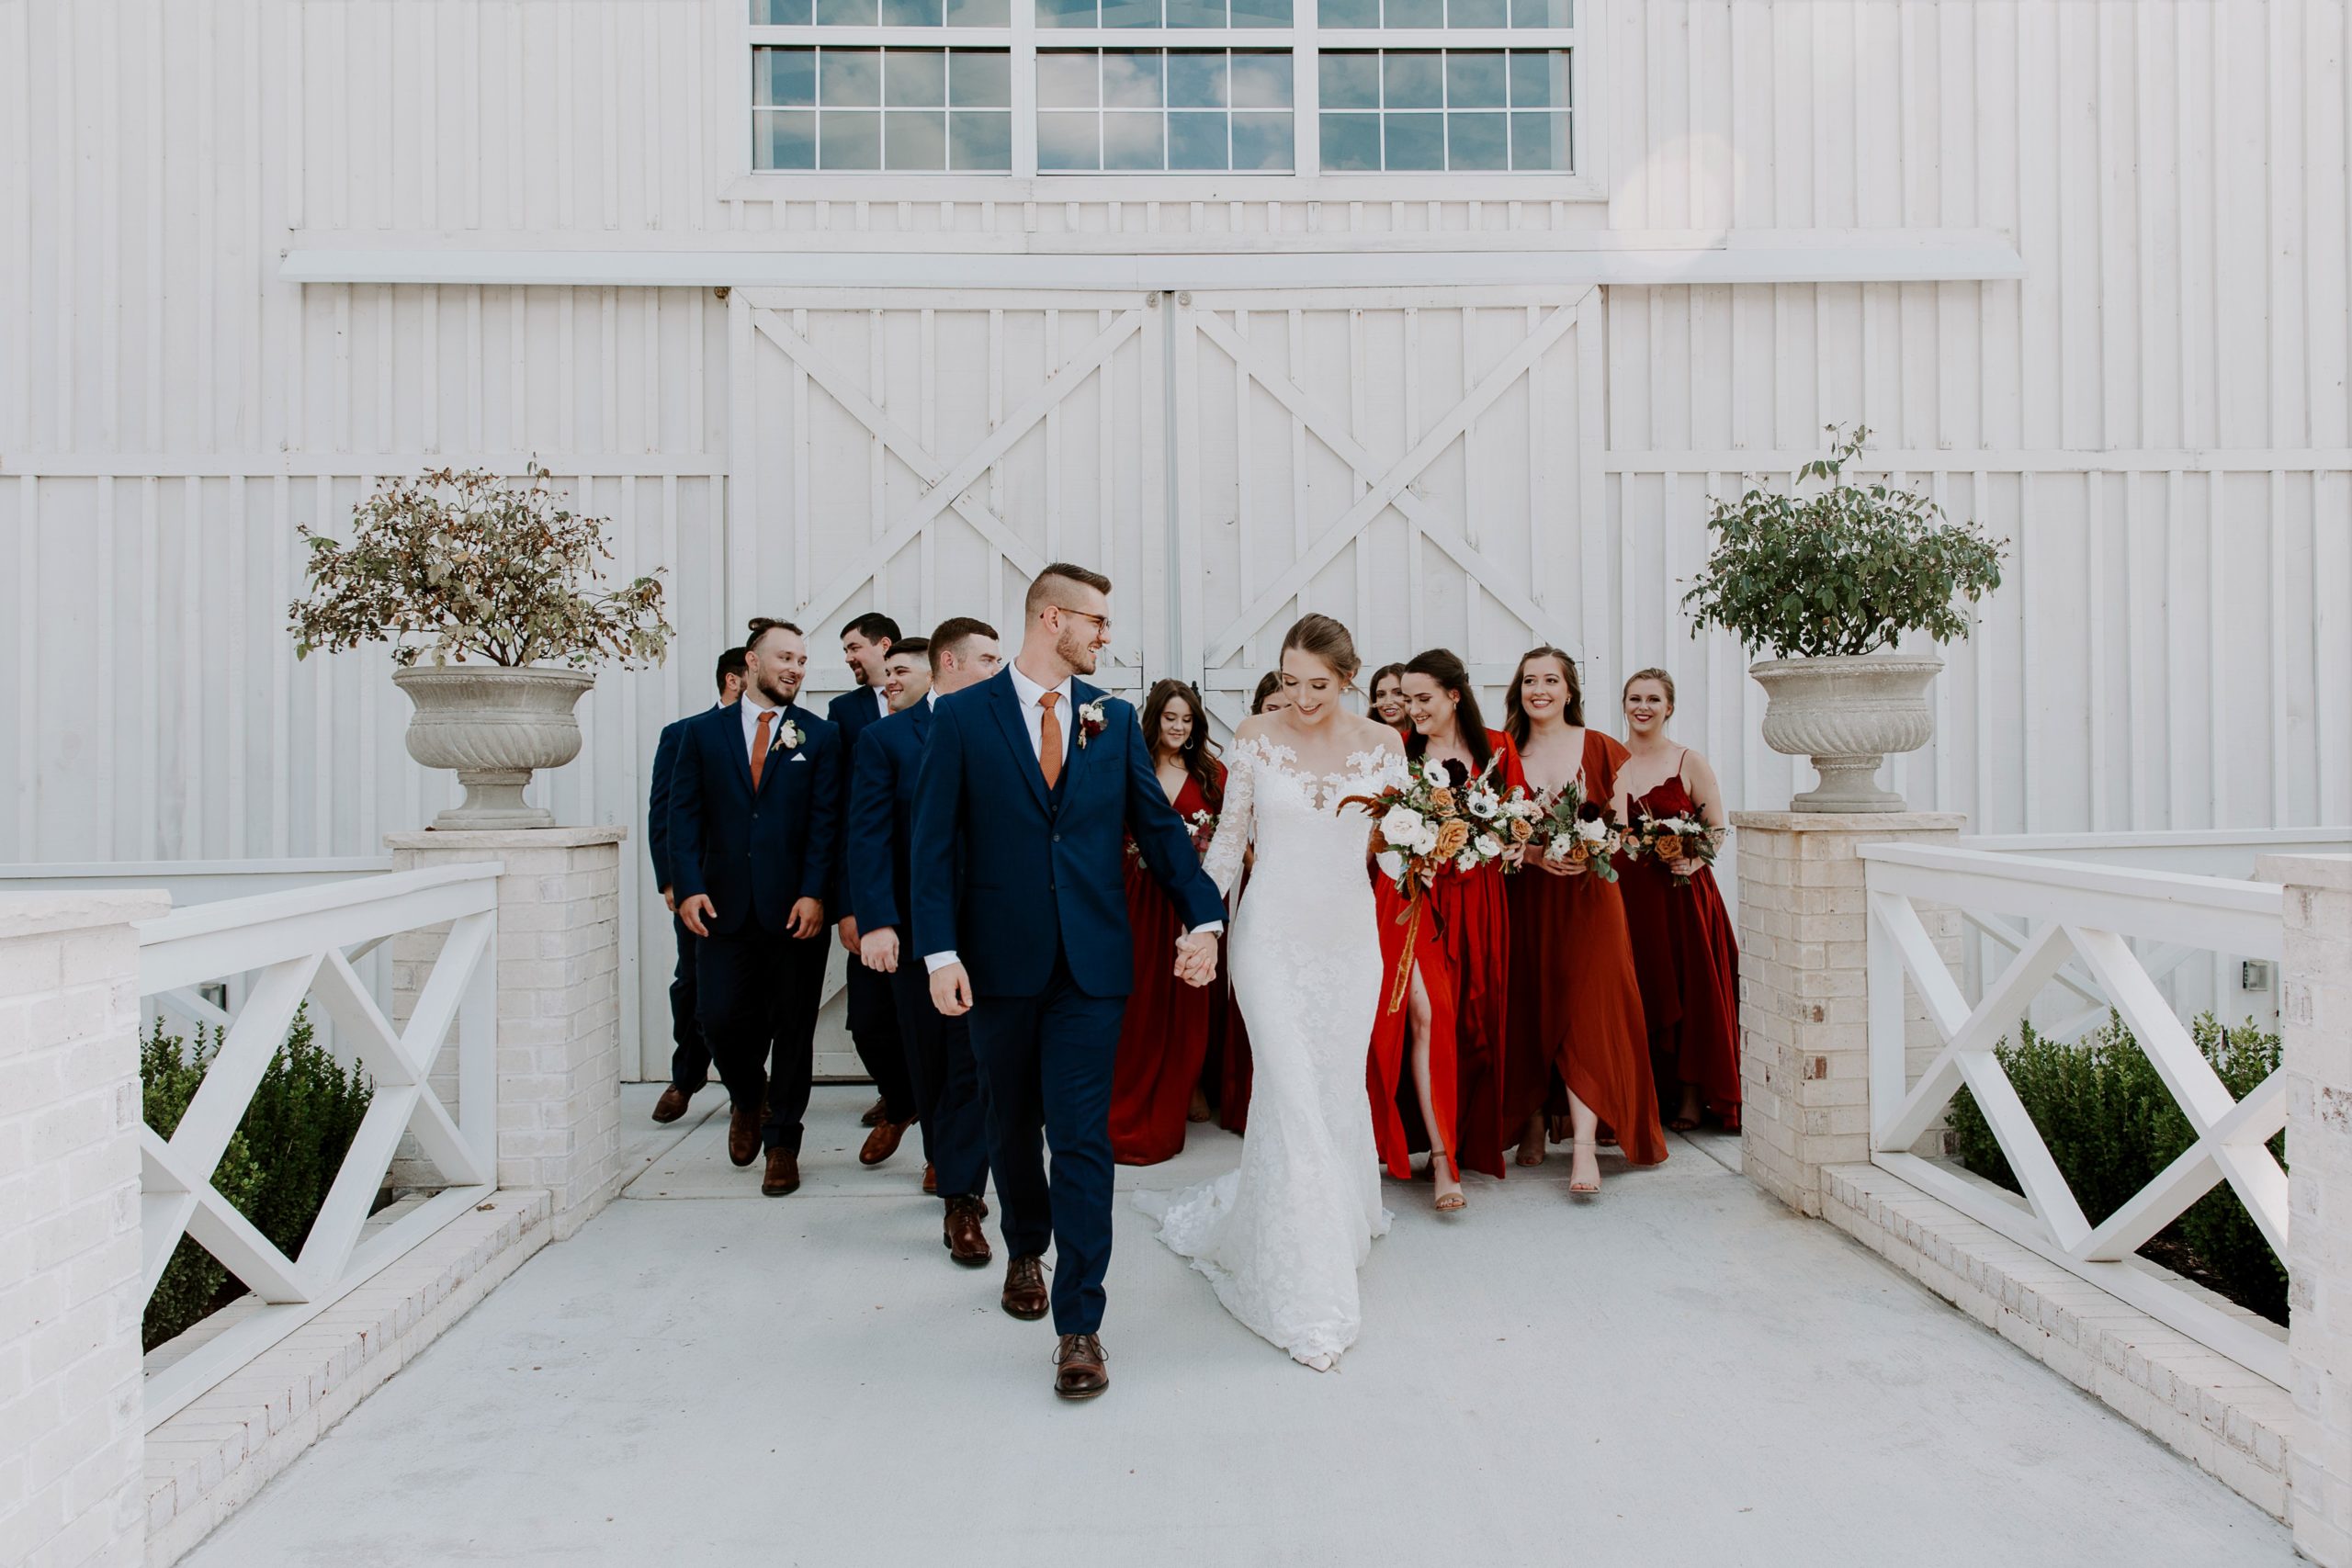 Couple holding hands and walking along a path with their wedding party